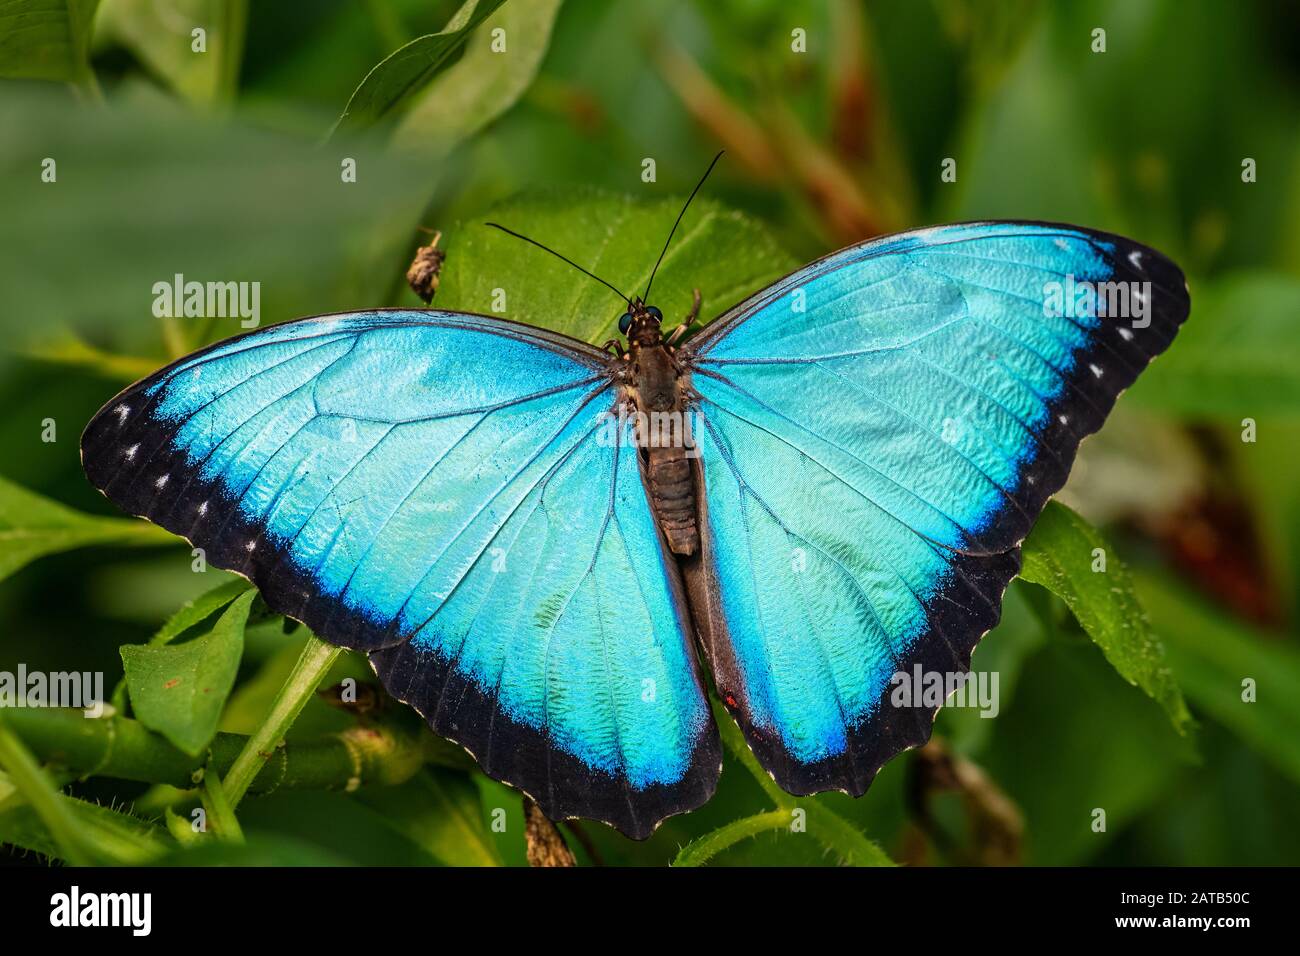 Granada morpho - Morpho granadensis, iconic beautiful large butterfly from Central American forests, Costa Rica. Stock Photo